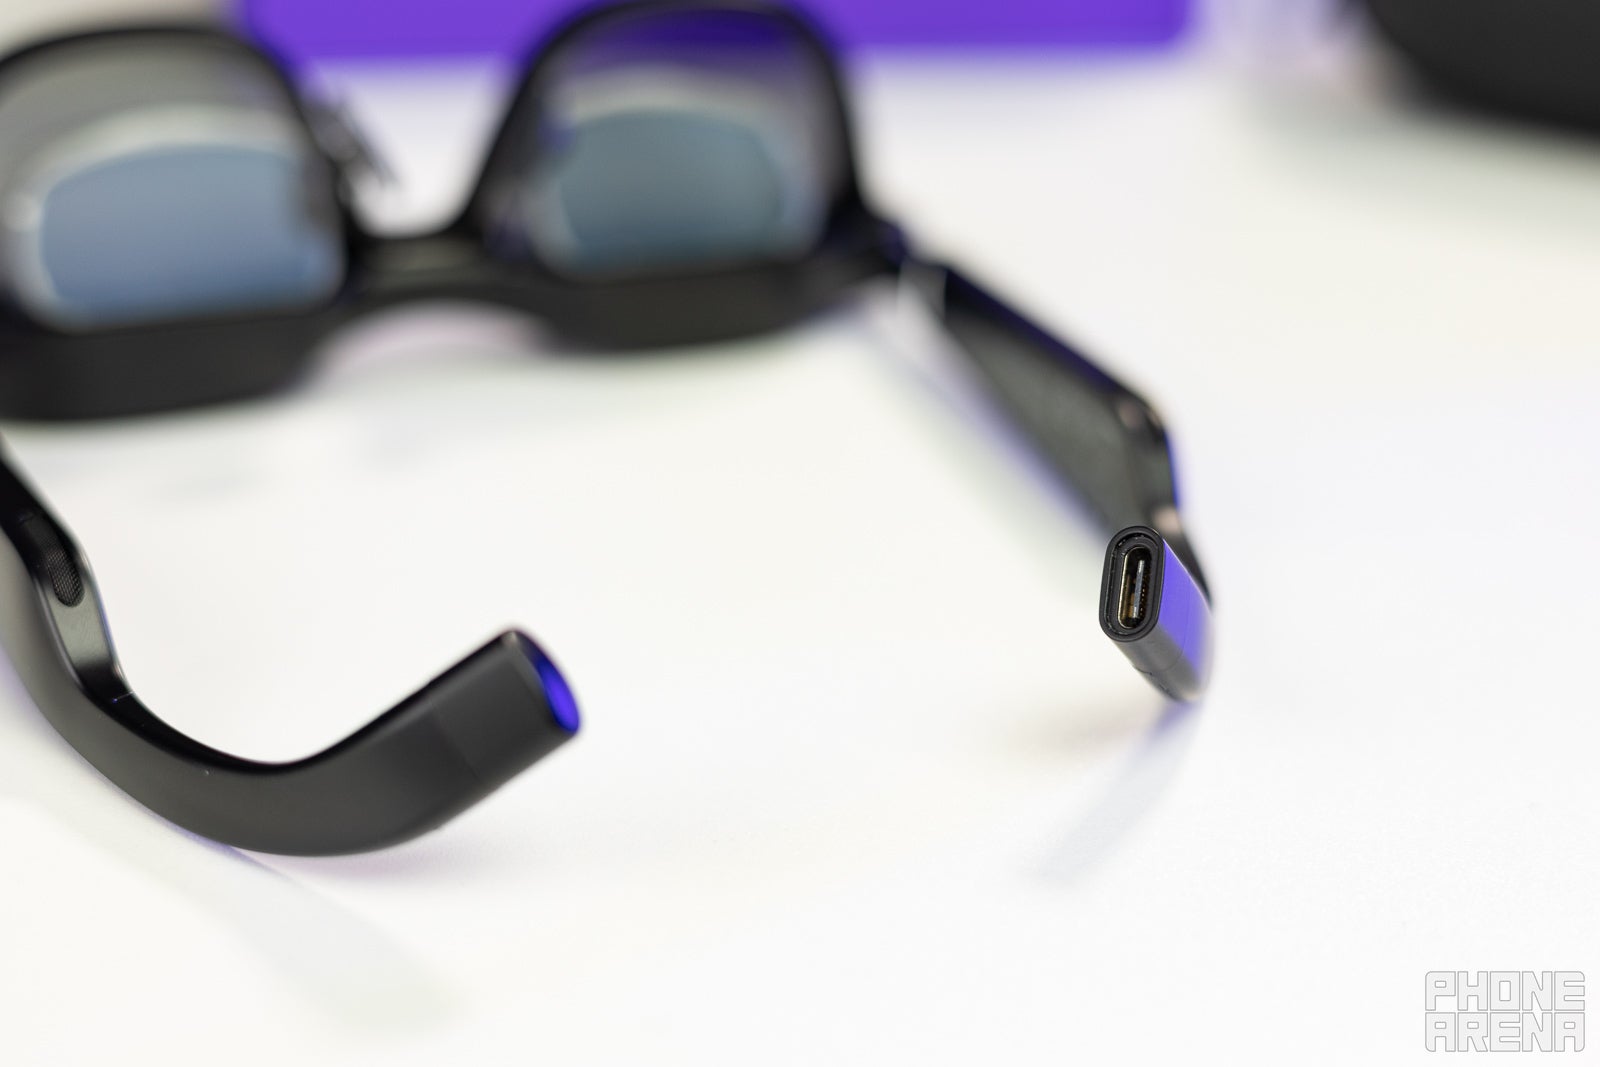 AR goggles: FORM is like Google Glass for swimmers